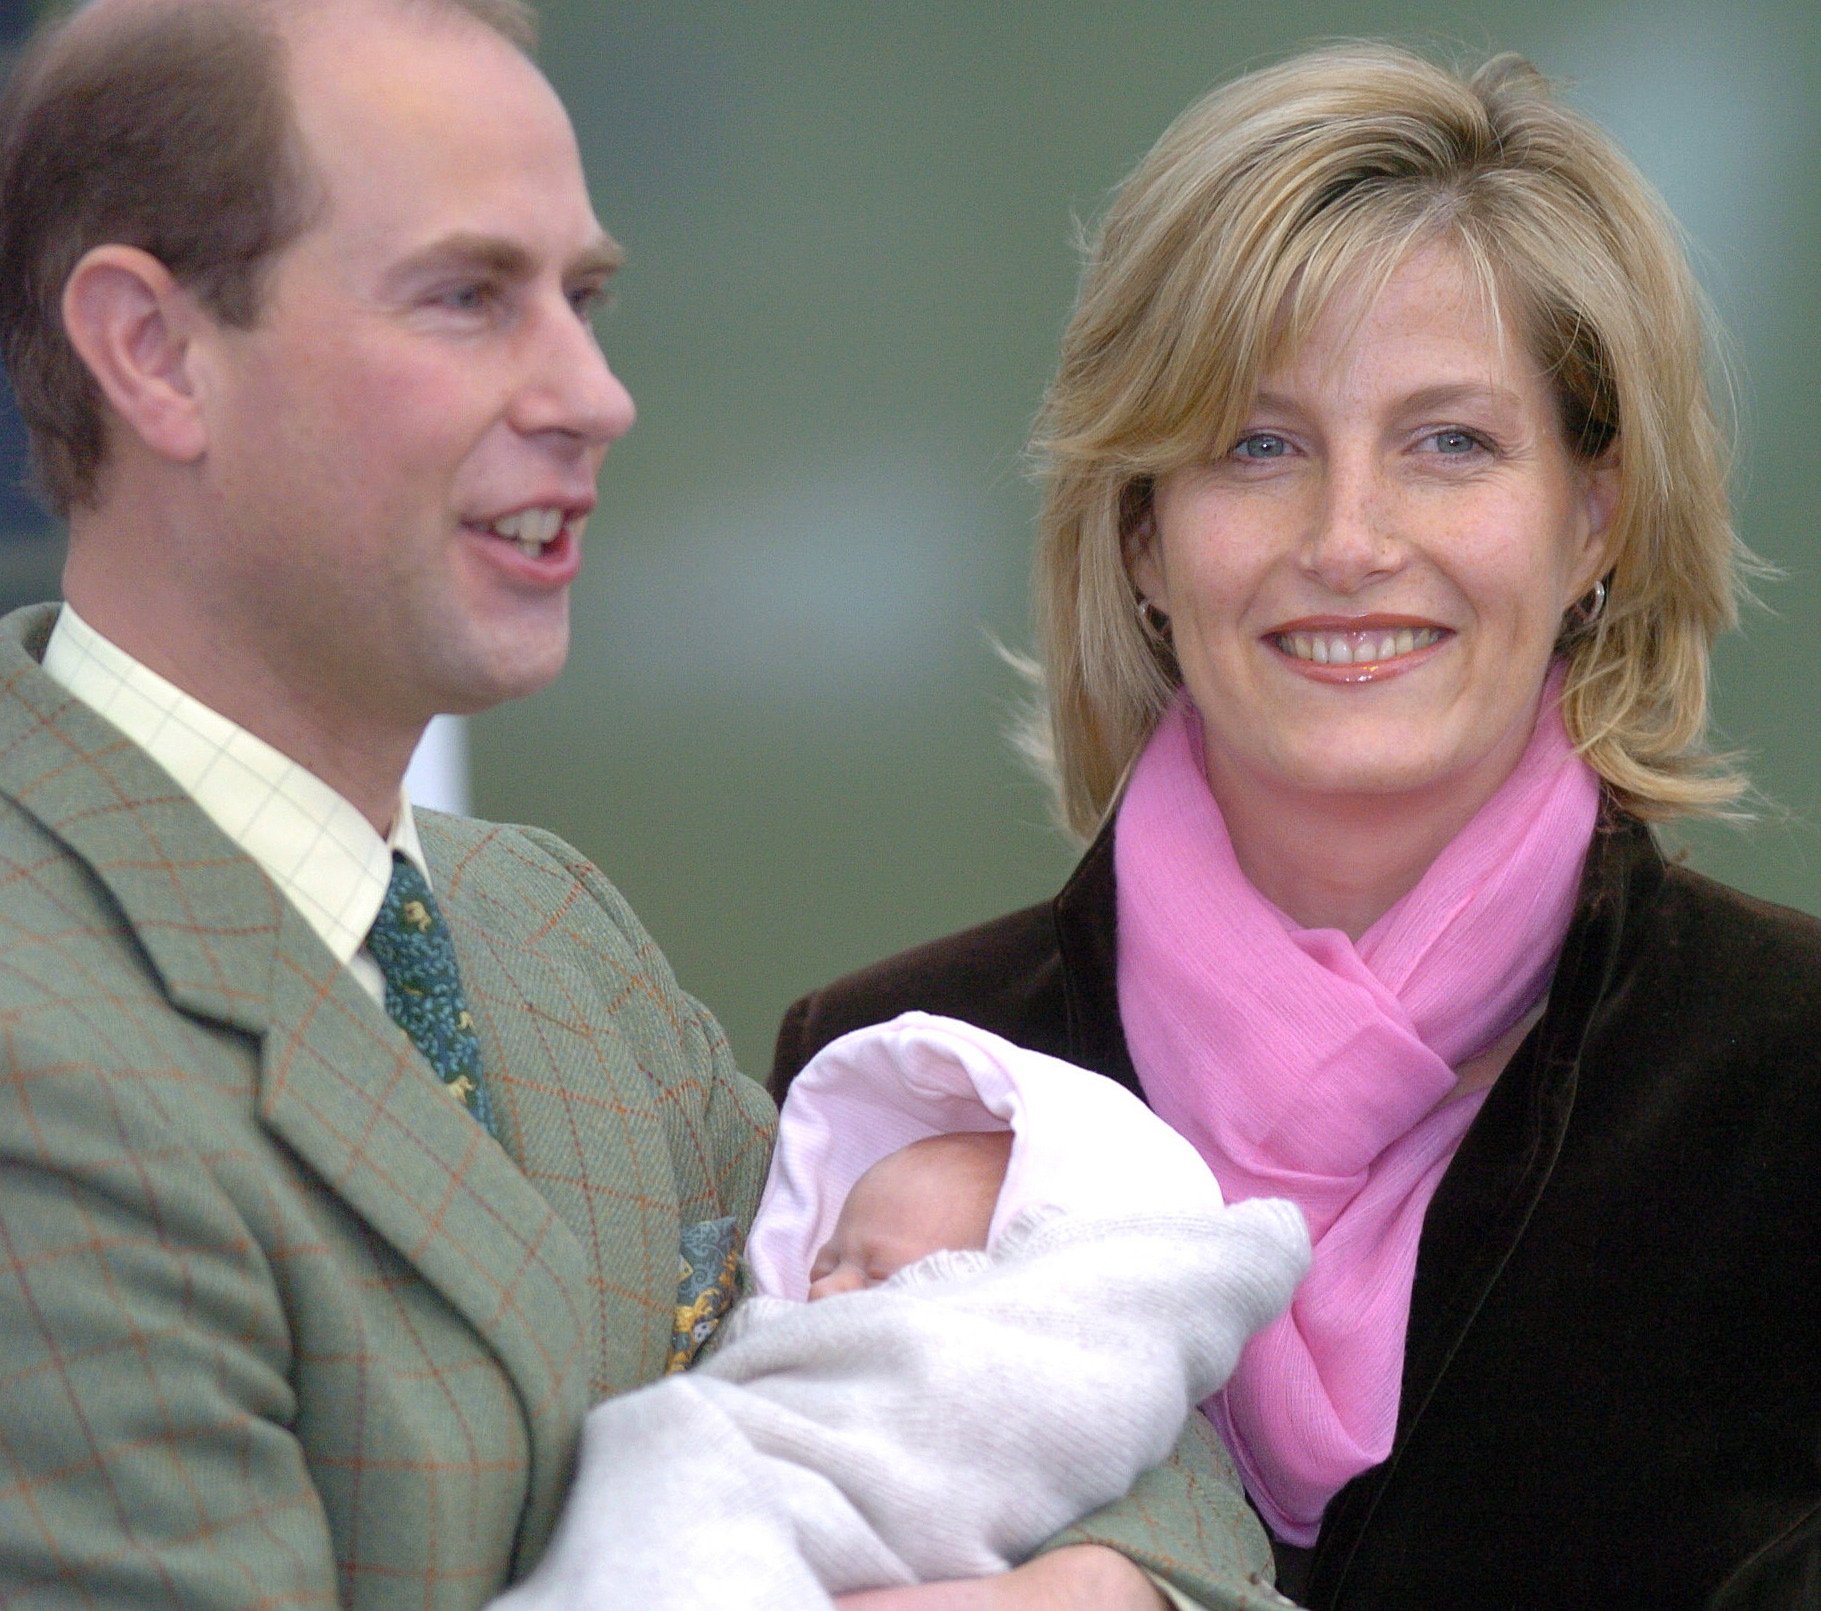 Princess Edward and his wife, Sophie, Countess Wessex pictured leaving Frimley Park Hospital with their newborn daughter, Lady Louise Windsor ┃Source: Getty Images